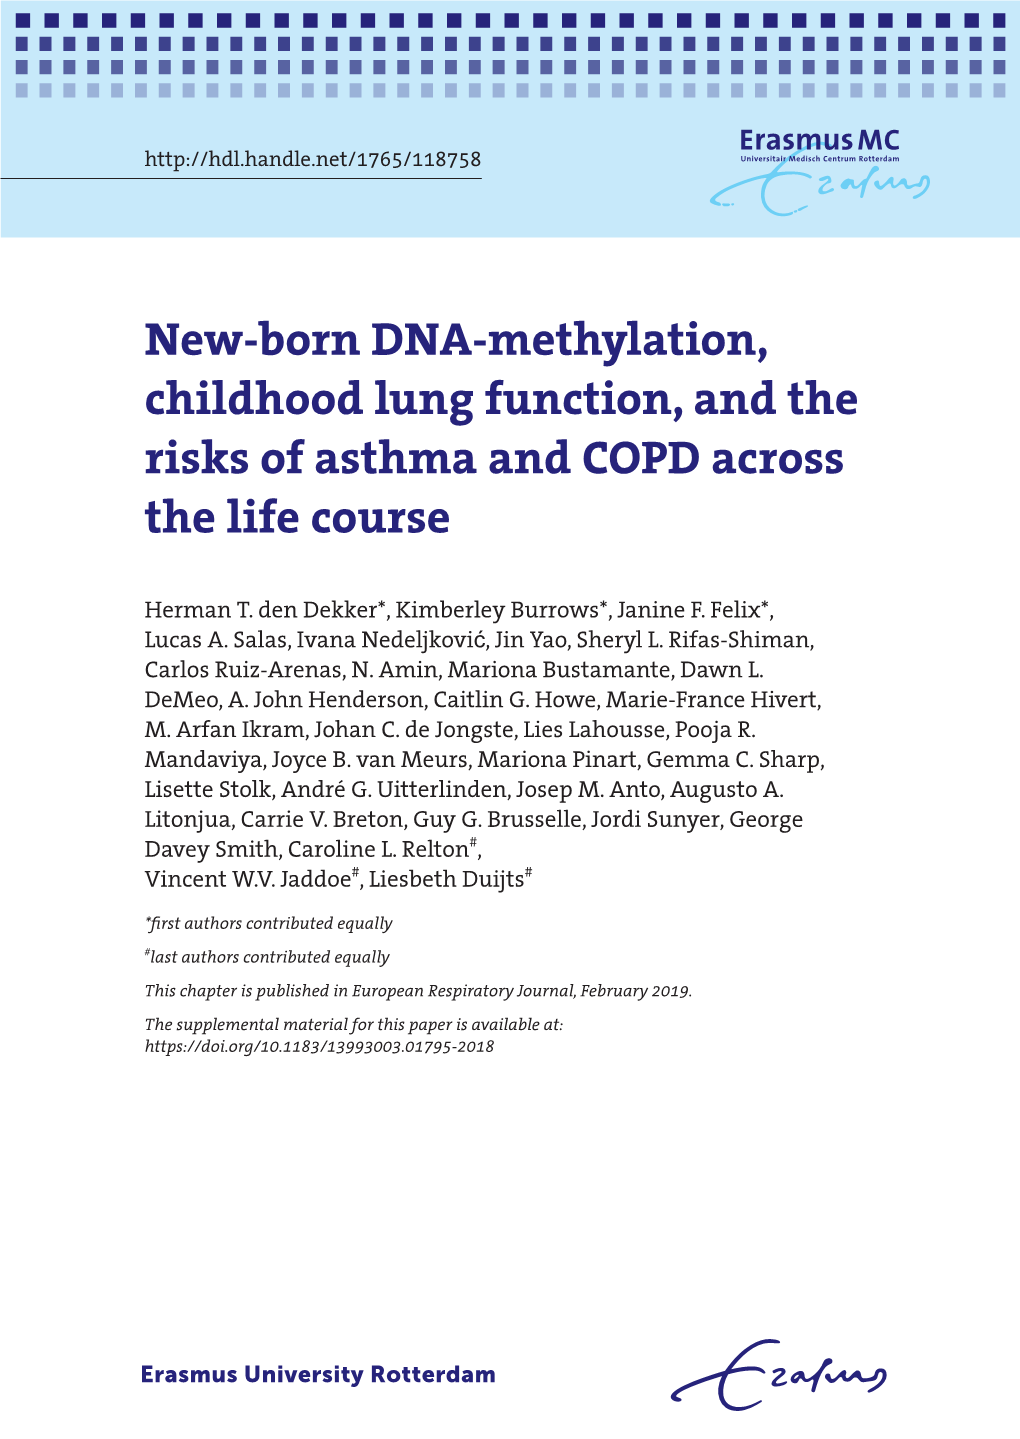 New-Born DNA-Methylation, Childhood Lung Function, and The